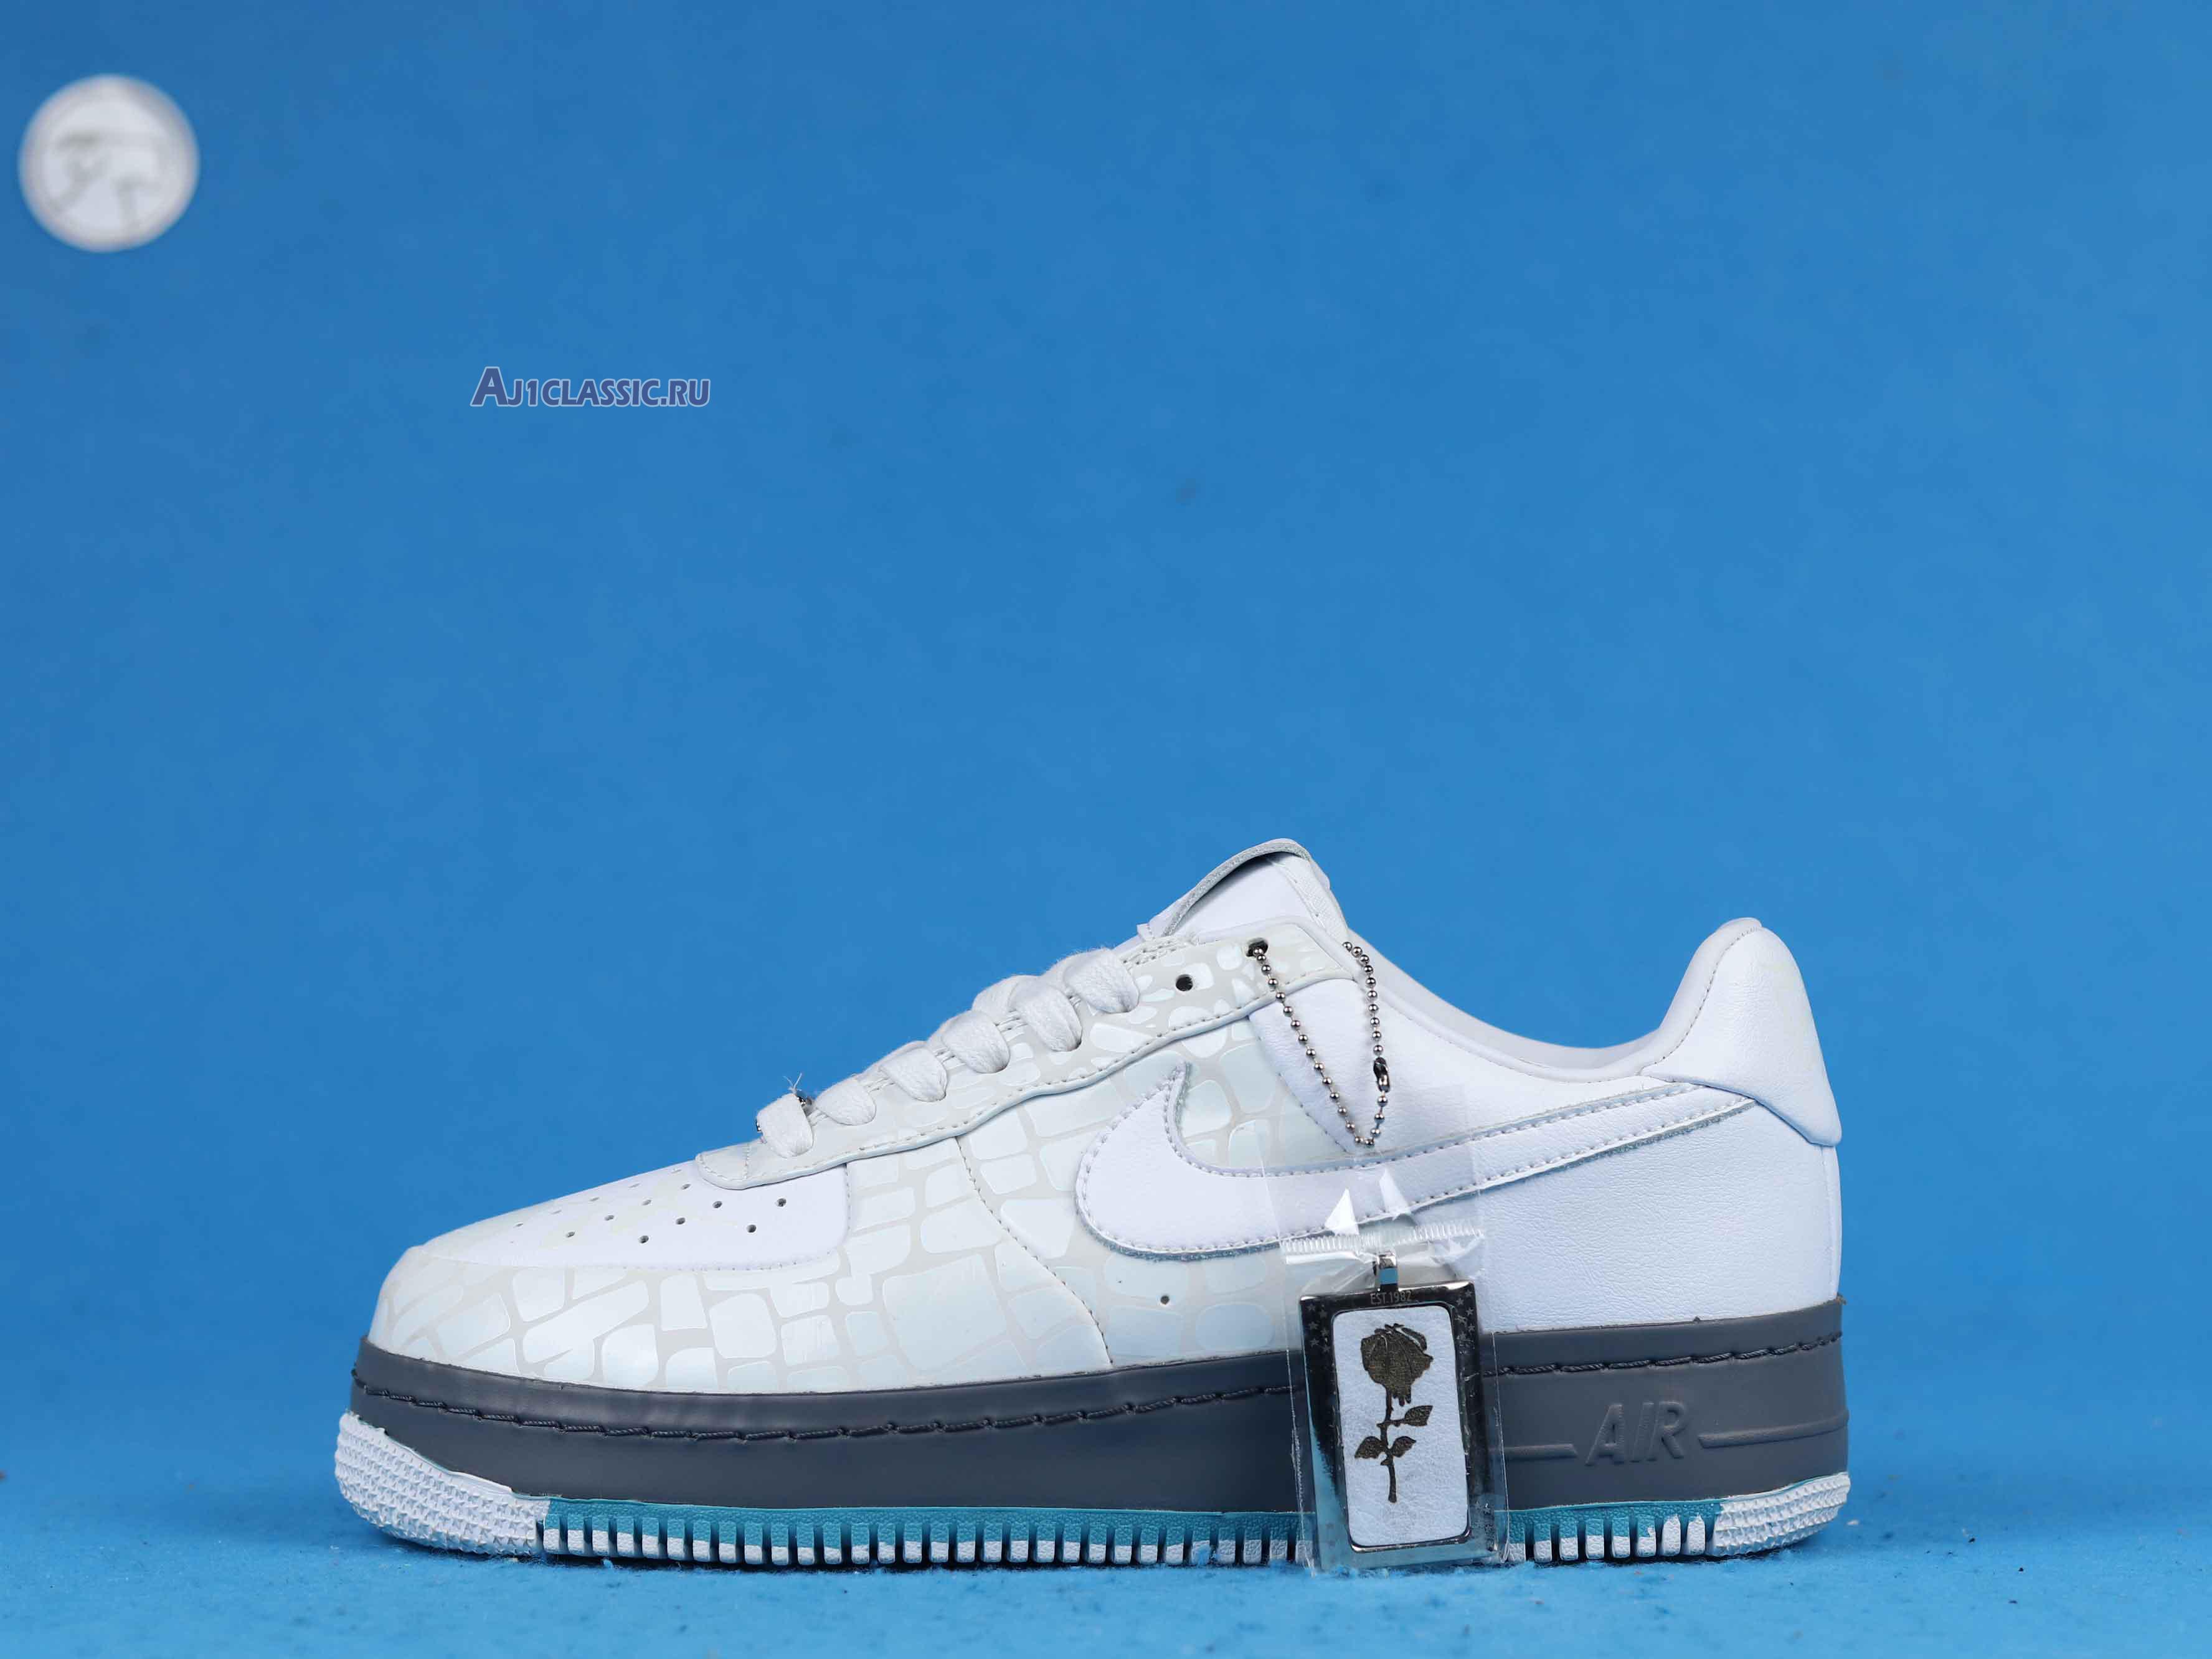 Nike Air Force 1 Sprm Mco I/O 07 "Rosies Dry Goods" 316077-111